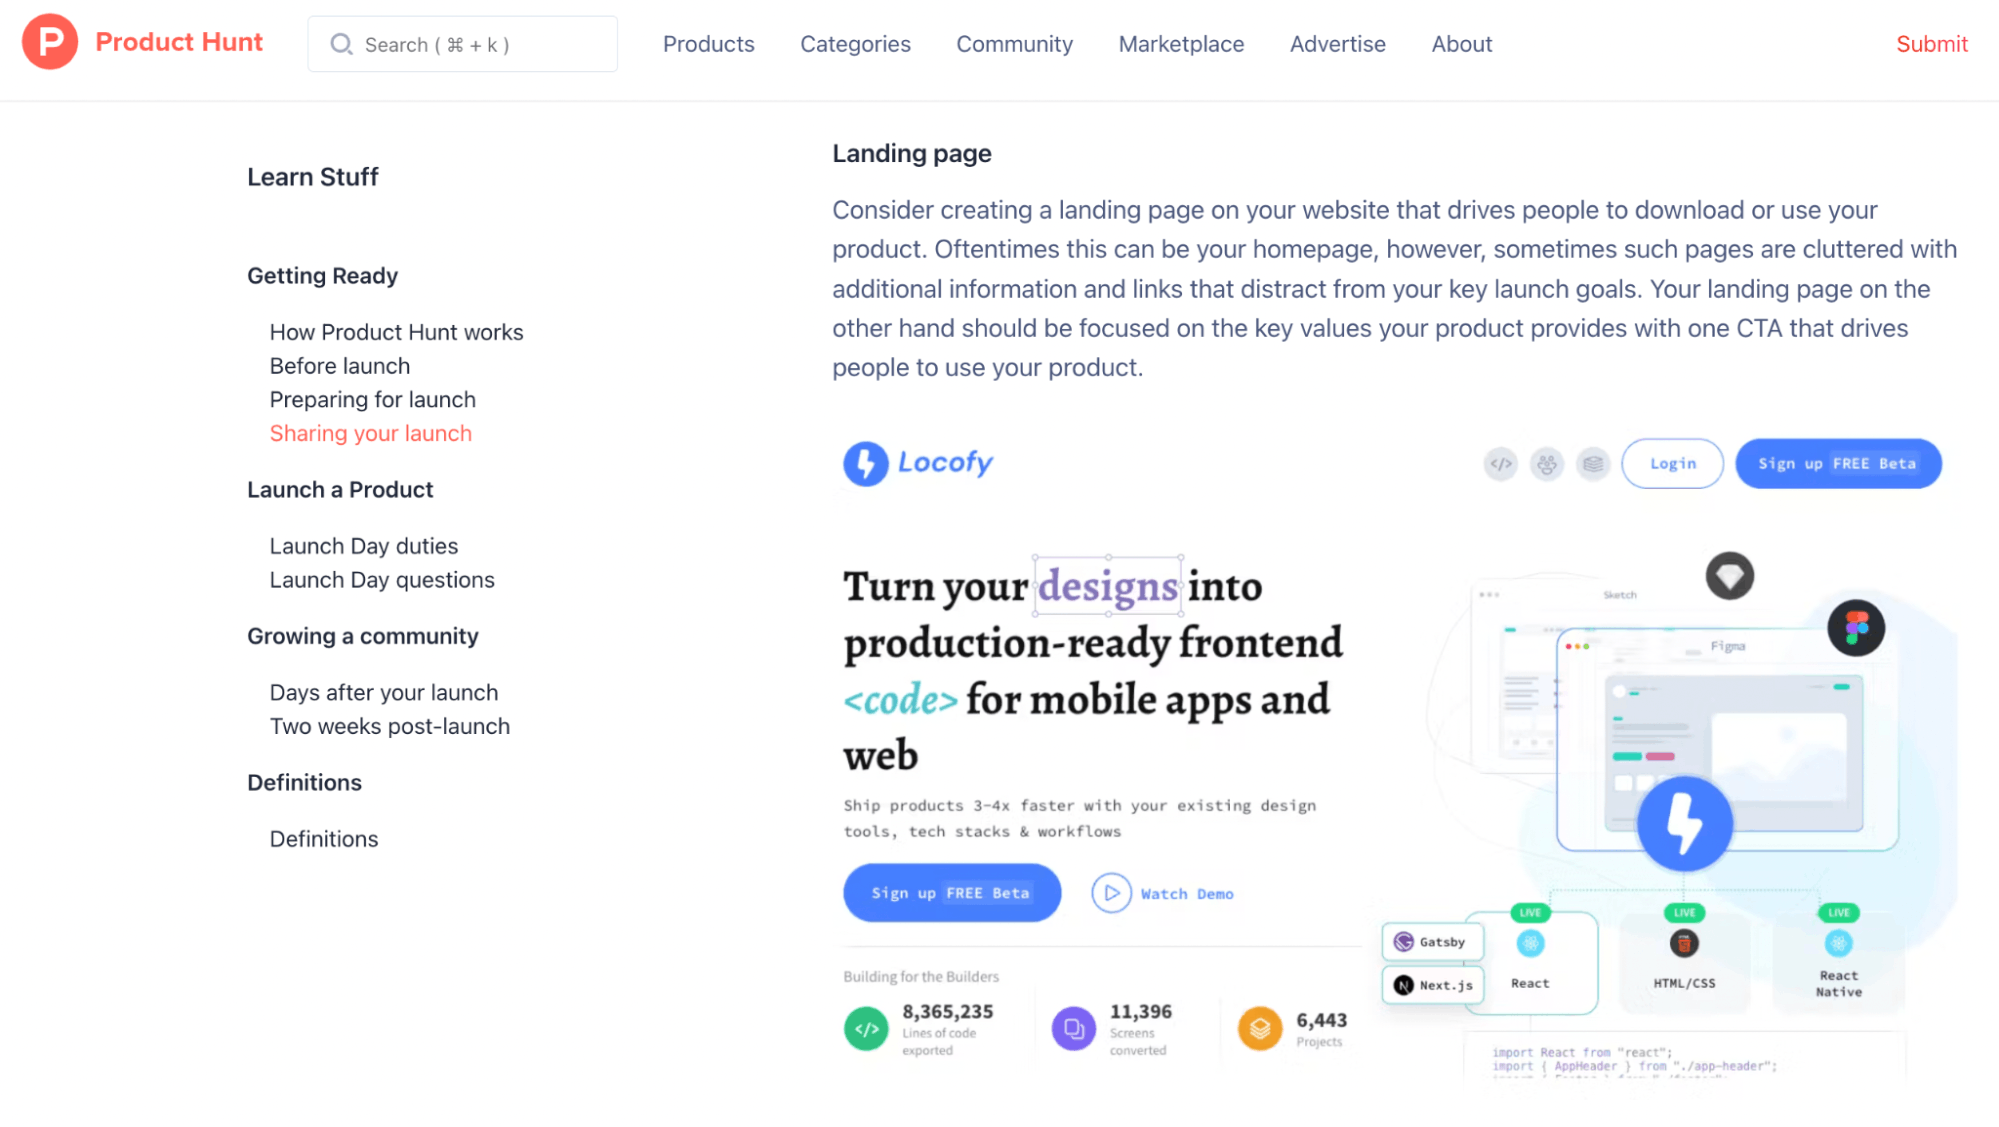 Locofy.ai featured in Product Hunt's own launch guide